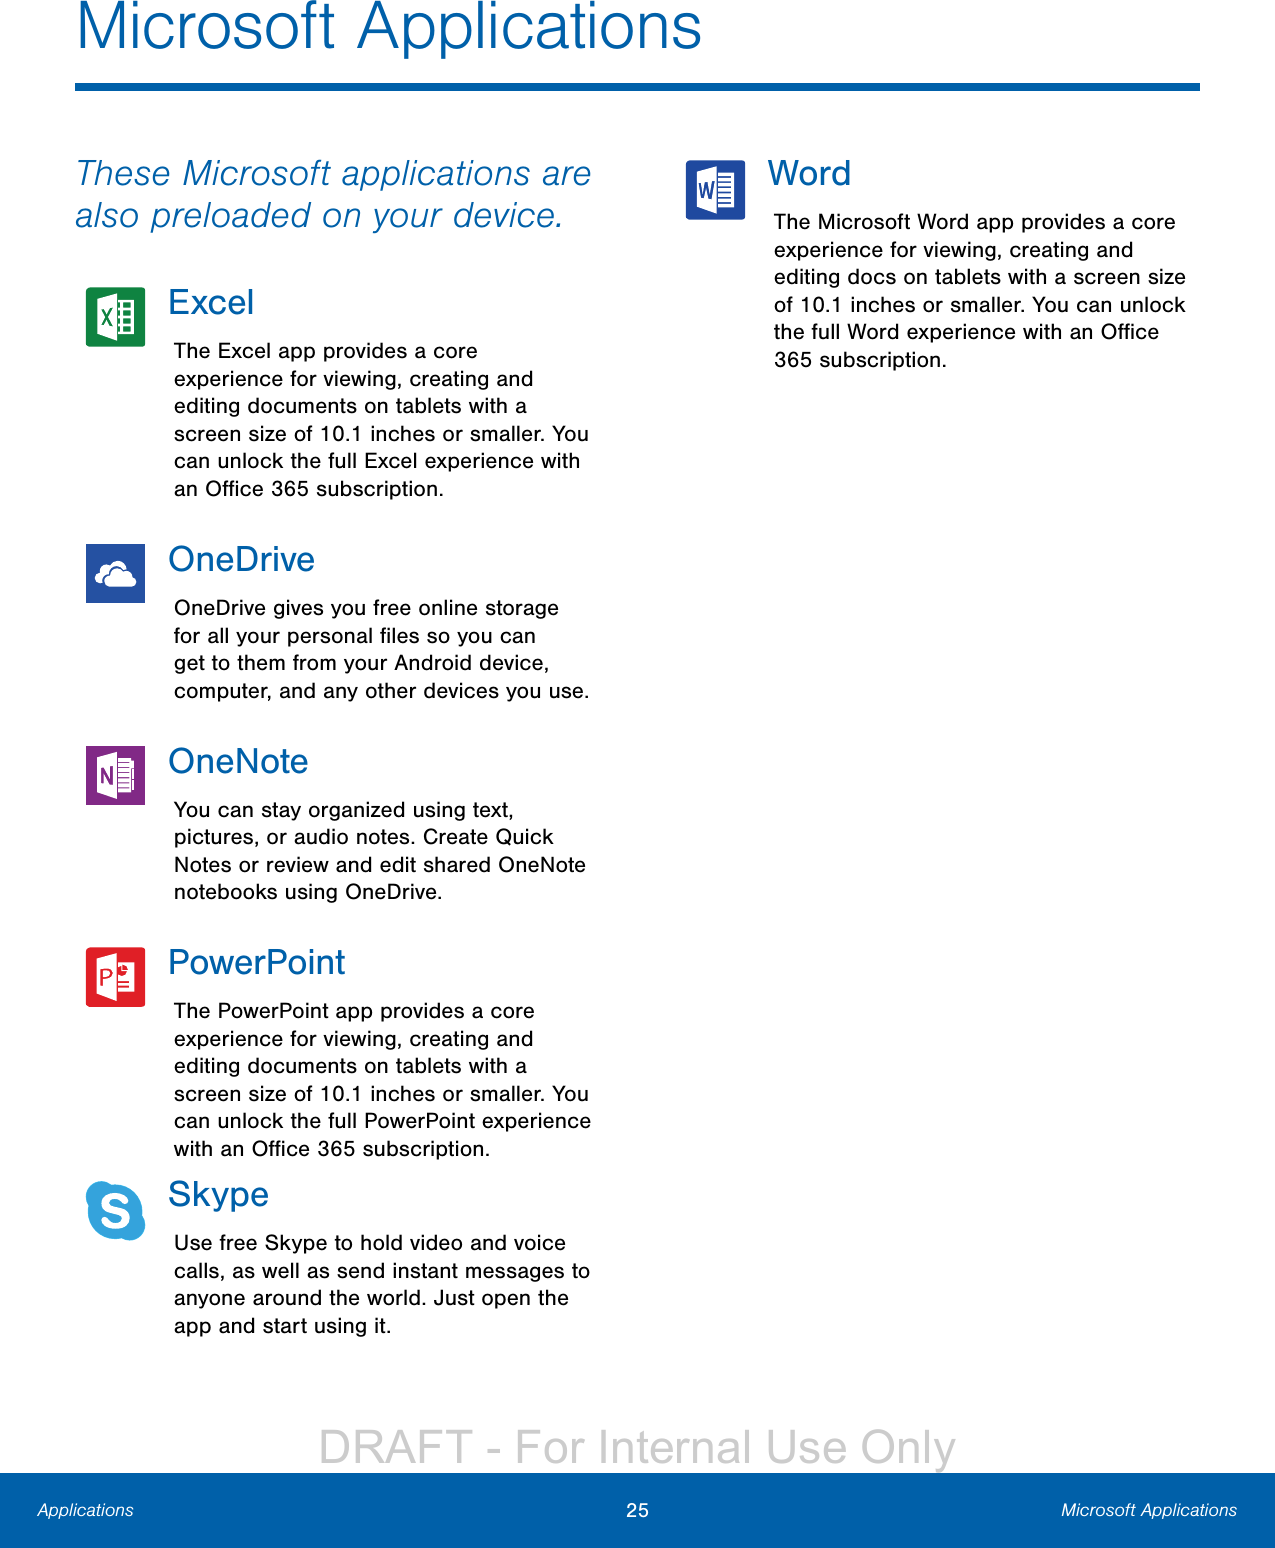 25 Microsoft ApplicationsApplicationsMicrosoft ApplicationsThese Microsoft applications are also preloaded on your device.ExcelThe Excel app provides a core experience for viewing, creating and editing documents on tablets with a screen size of 10.1 inches or smaller. You can unlock the full Excel experience with an Oﬃce 365 subscription.OneDriveOneDrive gives you free online storage for all your personal ﬁles so you can get to them from your Android device, computer, and any other devices you use.OneNoteYou can stay organized using text, pictures, or audio notes. Create Quick Notes or review and edit shared OneNote notebooks using OneDrive.PowerPointThe PowerPoint app provides a core experience for viewing, creating and editing documents on tablets with a screen size of 10.1 inches or smaller. You can unlock the full PowerPoint experience with an Oﬃce 365 subscription.SkypeUse free Skype to hold video and voice calls, as well as send instant messages to anyone around the world. Just open the app and start using it.WordThe Microsoft Word app provides a core experience for viewing, creating and editing docs on tablets with a screen size of 10.1 inches or smaller. You can unlock the full Word experience with an Oﬃce 365 subscription.DRAFT - For Internal Use Only